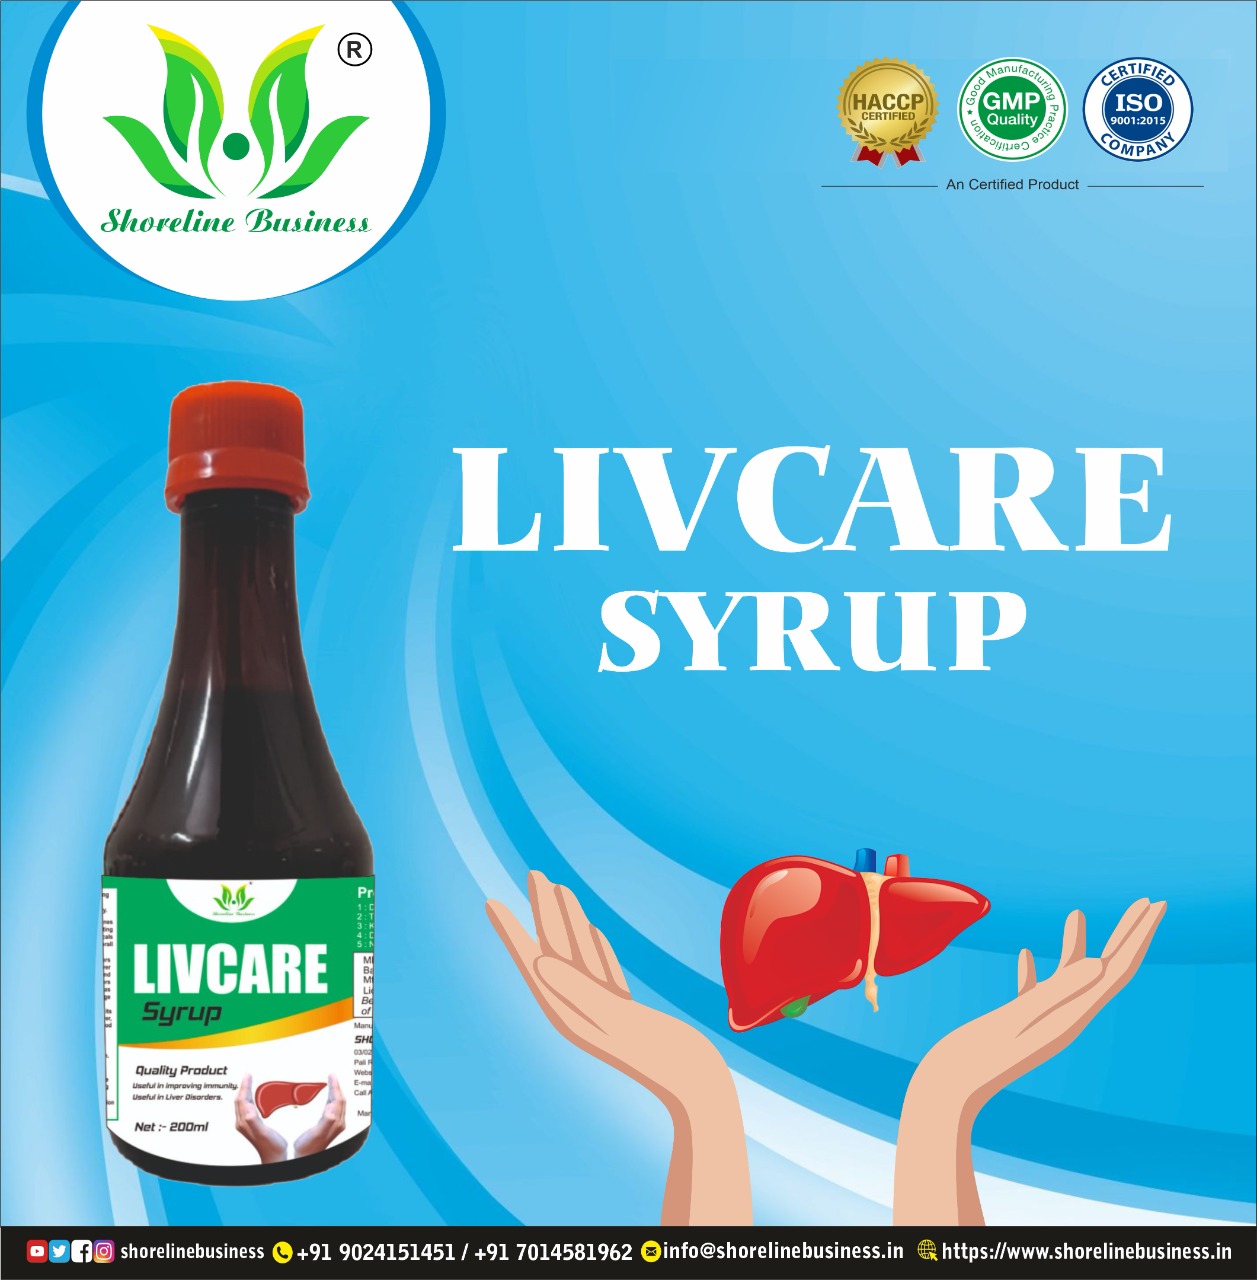 LIVCARE SYRUP